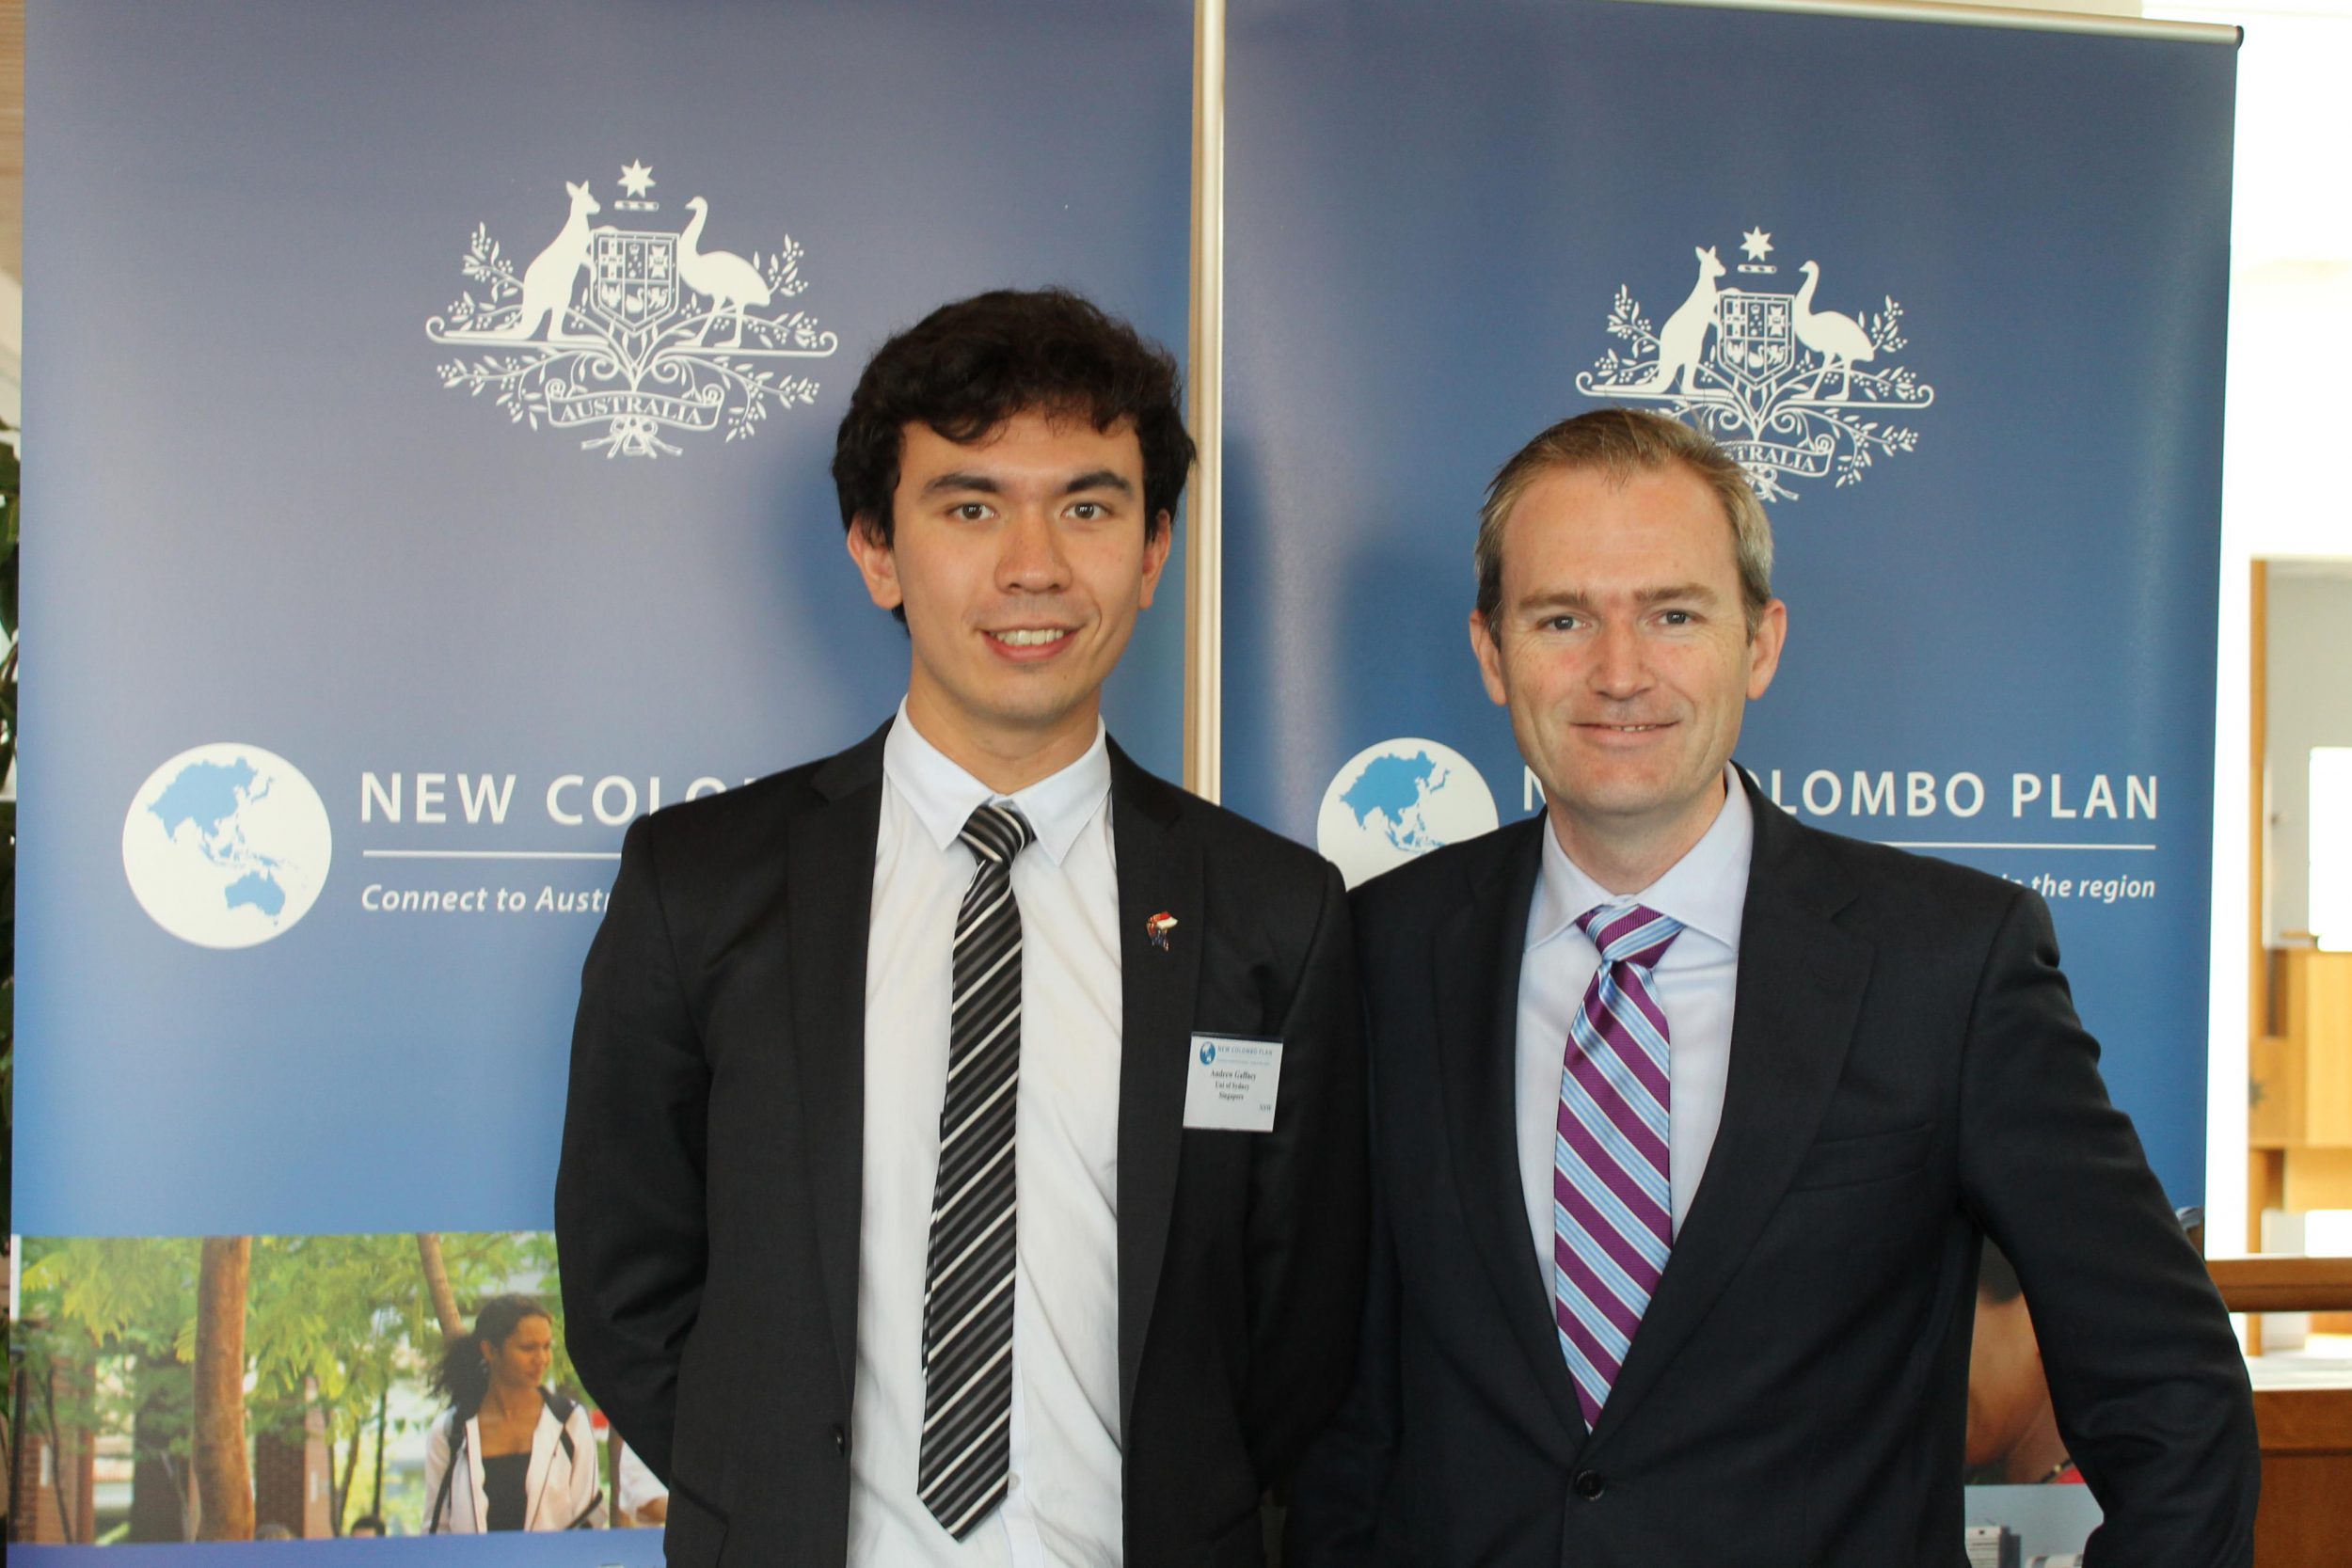 ANDREW GAFFNEY ANNOUNCED AS NEW COLOMBO PLAN SCHOLAR